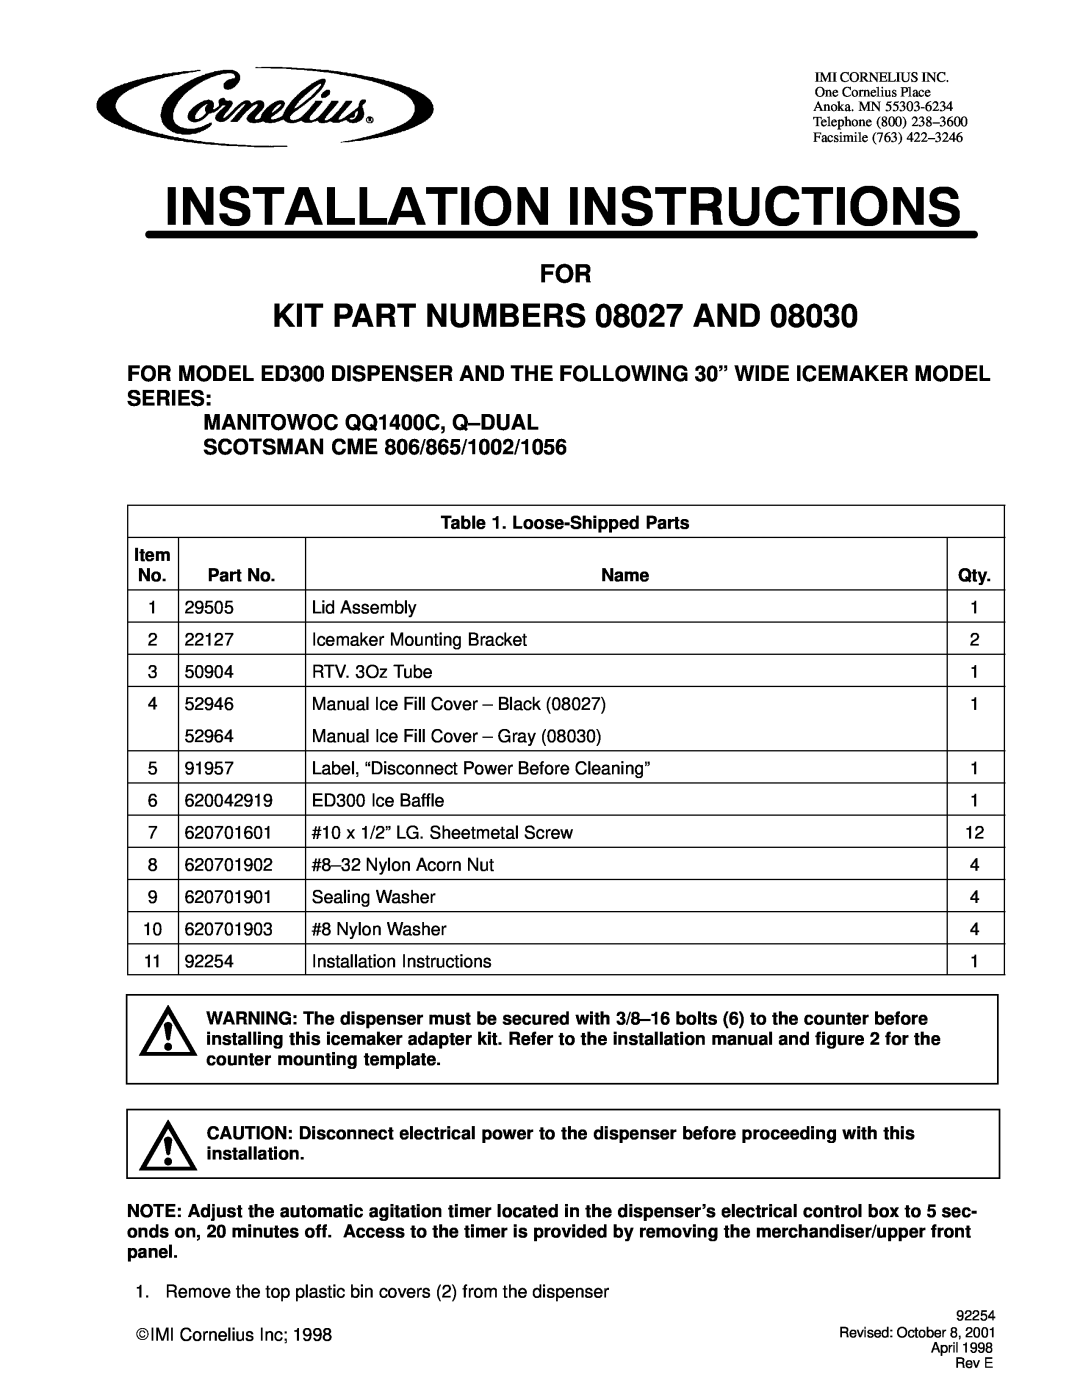 Cornelius 08030, 29505 installation instructions KIT PART NUMBERS 08027 AND 